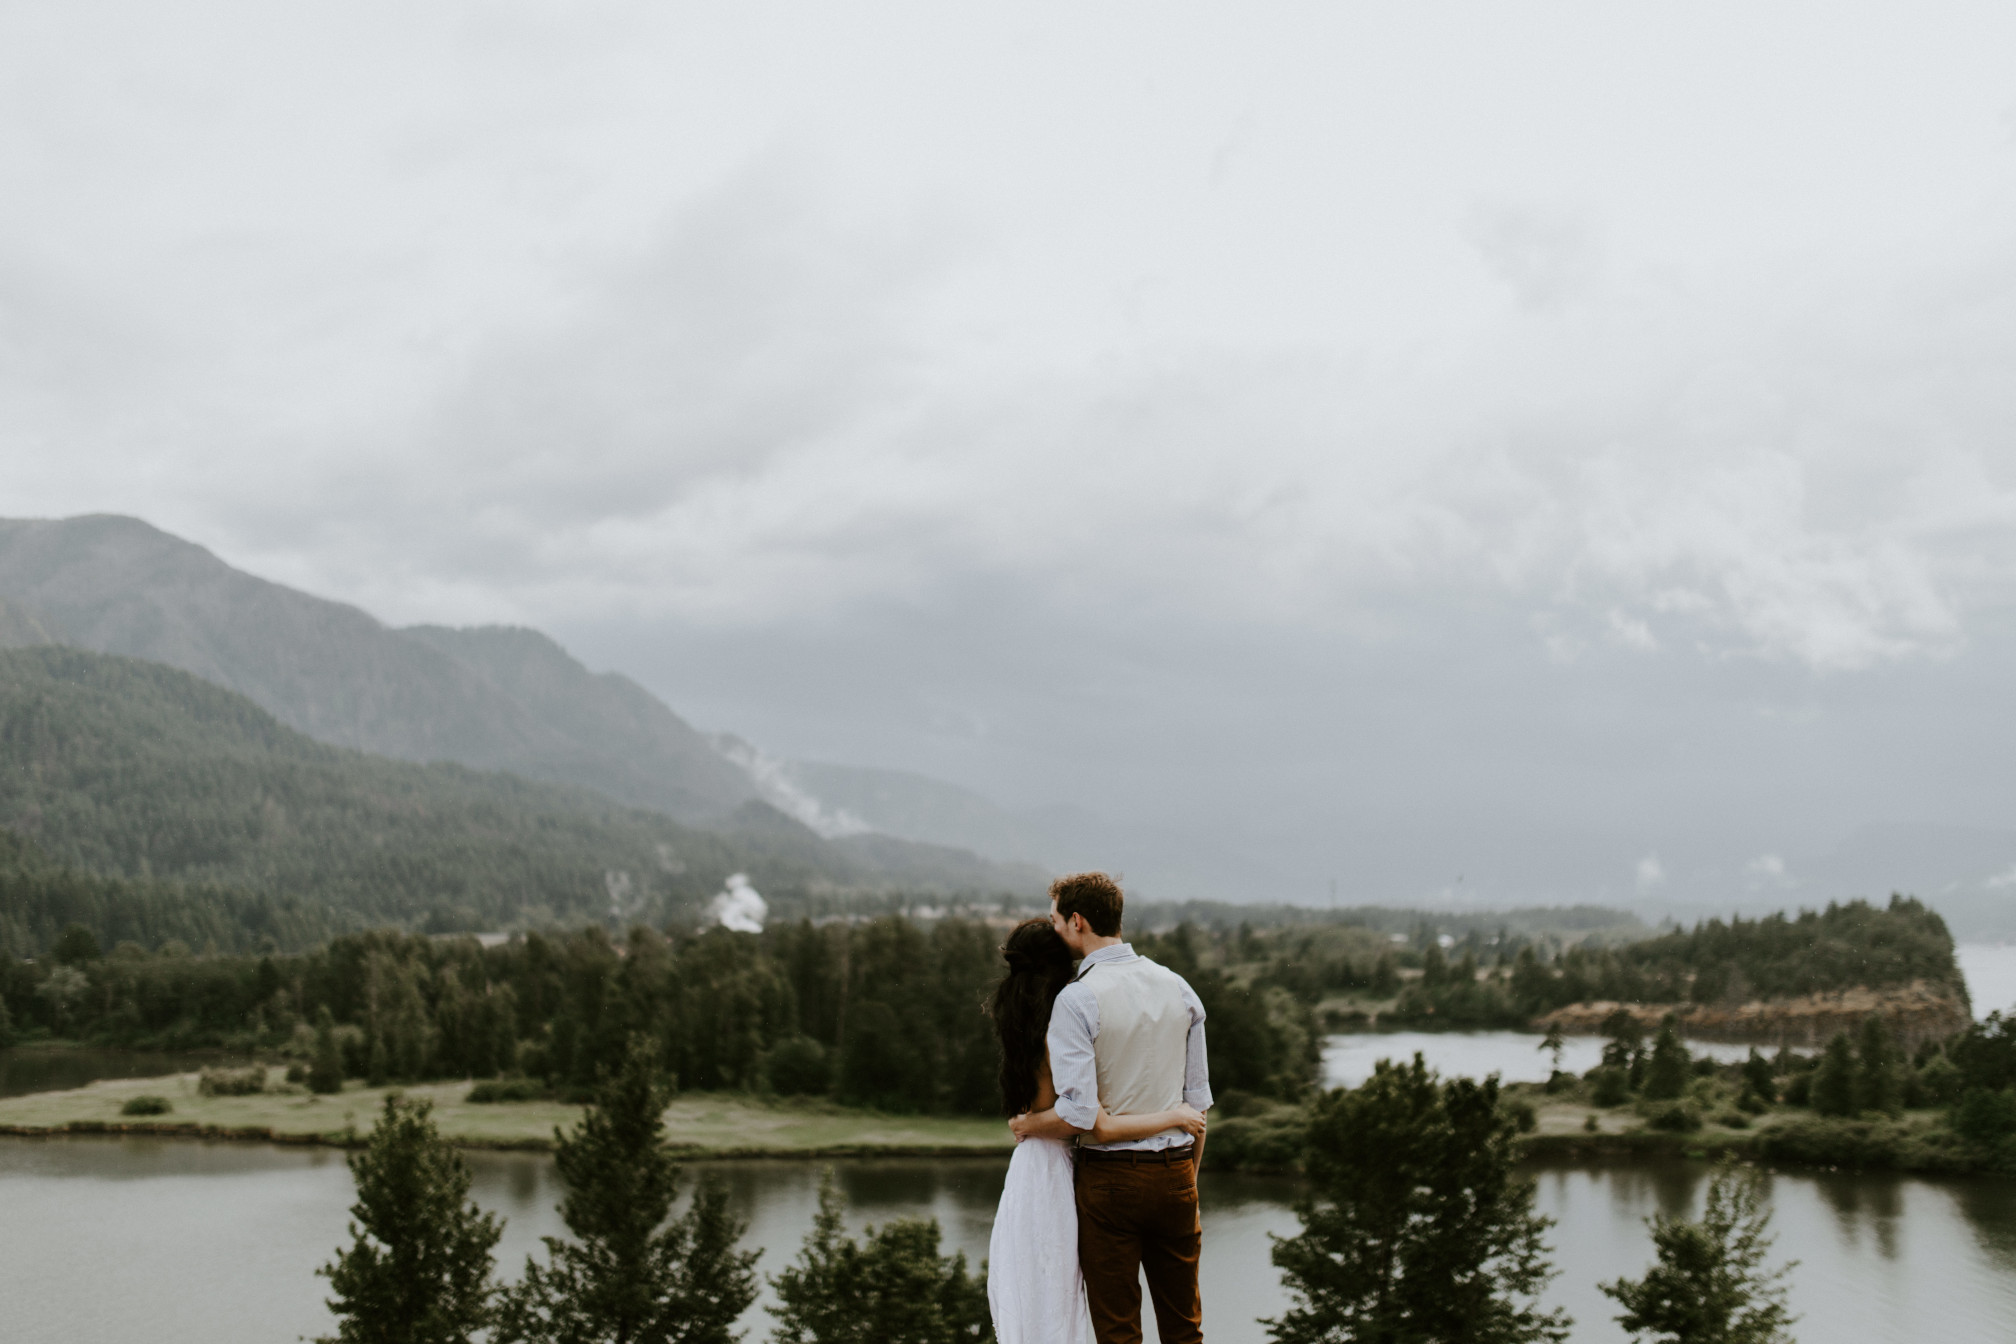 Jacob and Kimberlie stand and admire the view of the Columbia River Gorge. Elopement wedding photography at Cascade Locks by Sienna Plus Josh.